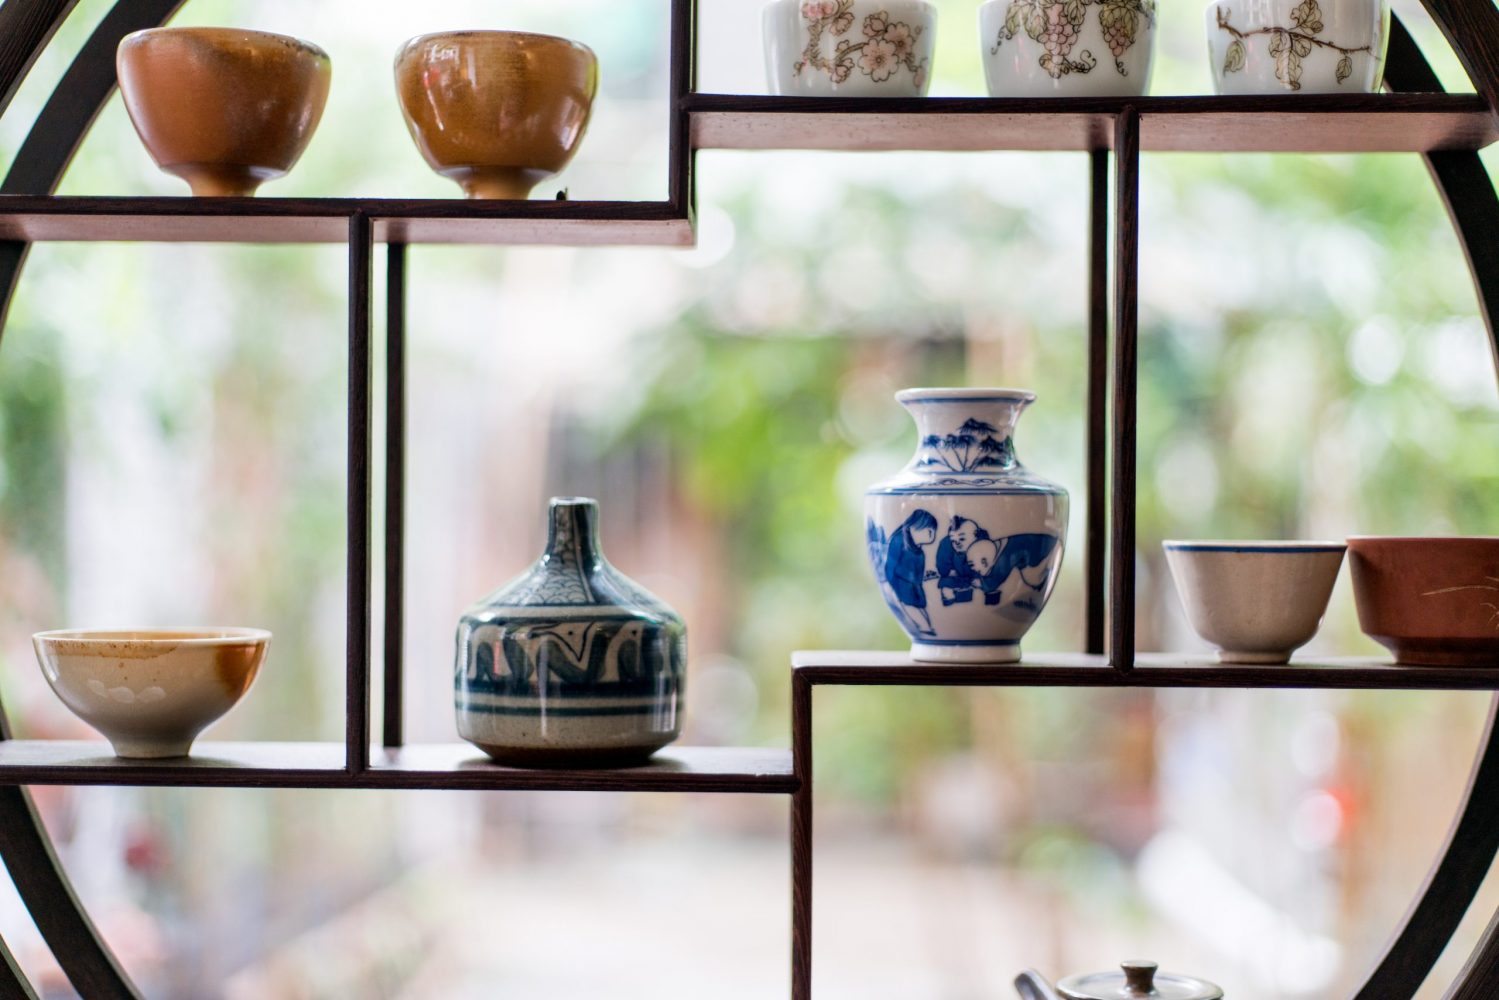 A round, asymmetrical shelf houses several porcelain items, listed in order from top to bottom: A set of three white bowls painted with cherry blossoms; a set of two burnt orange bowls; a pair of mismatched neutral-coloured bowls; a blue and white porcelain urn; a more rustic blue and white vase; and a small beige bowl with neutral-coloured splotches.